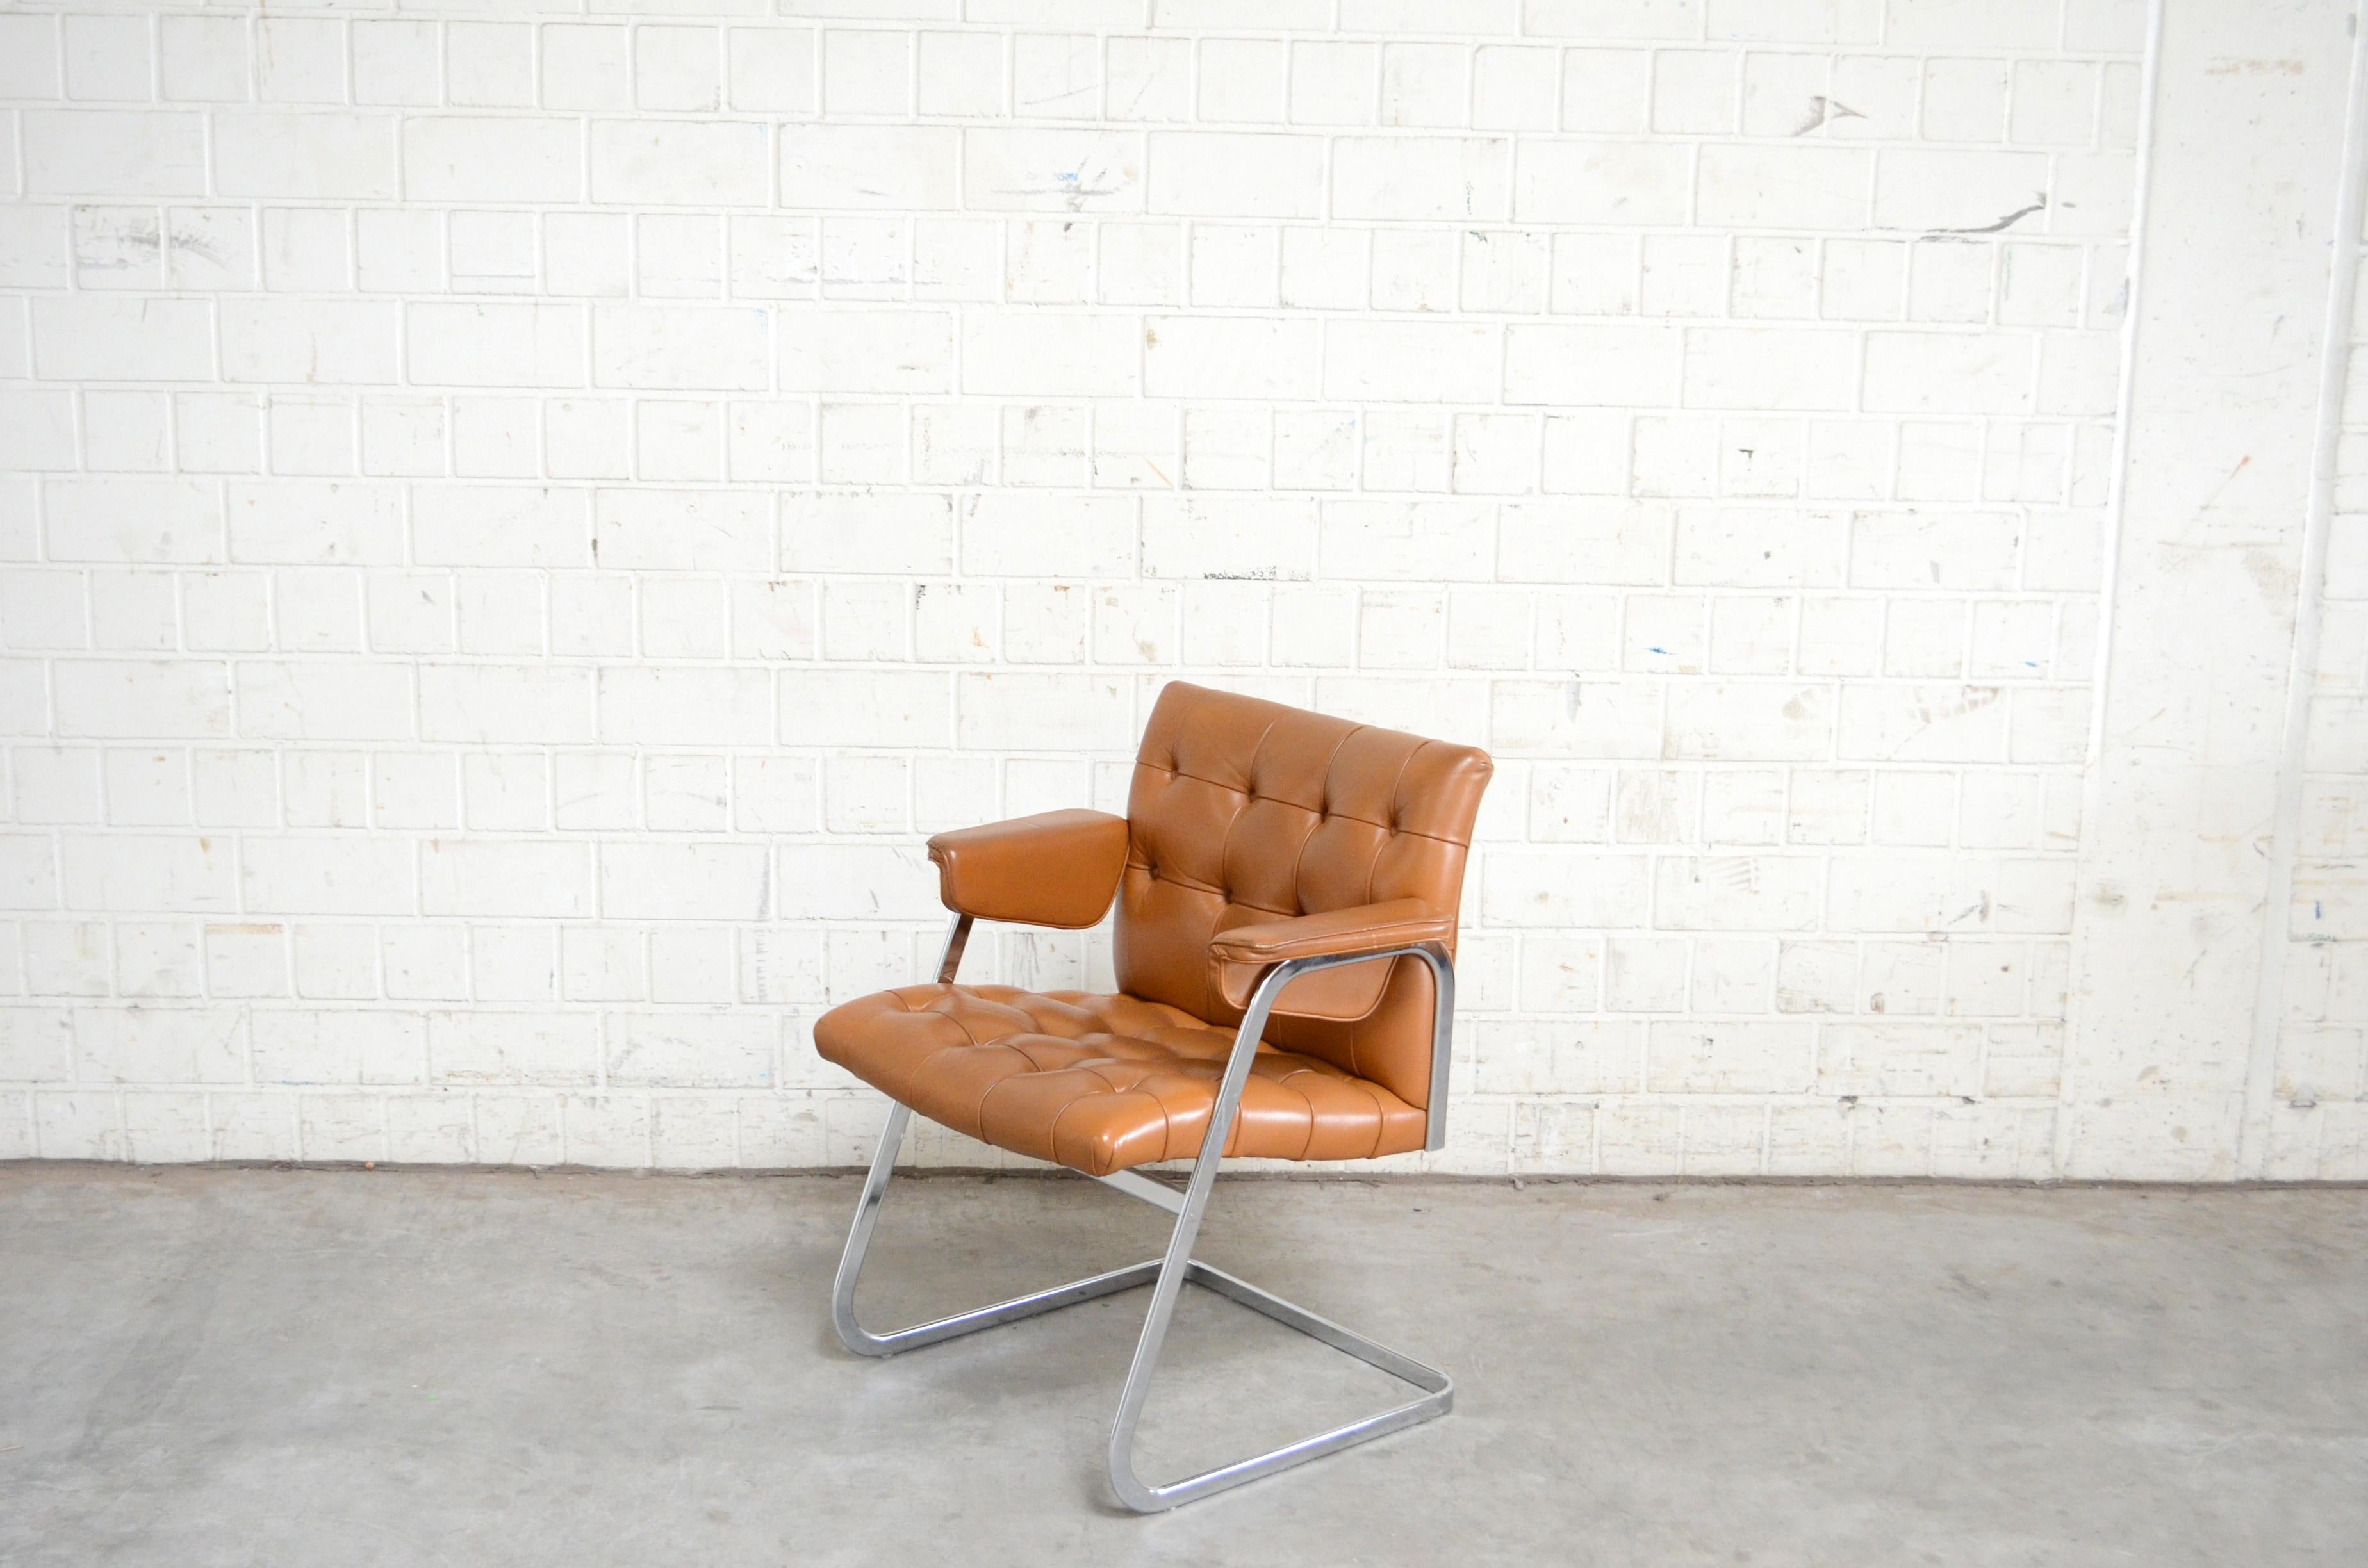 Robert Haussmann RH 305 armchairs design of 1957 and manufactured by De Sede.
Brandy cognac leather. The leather was recolored some years ago from a leather company.
This version from 1970s is very rare version with Softpad armrests.
The design